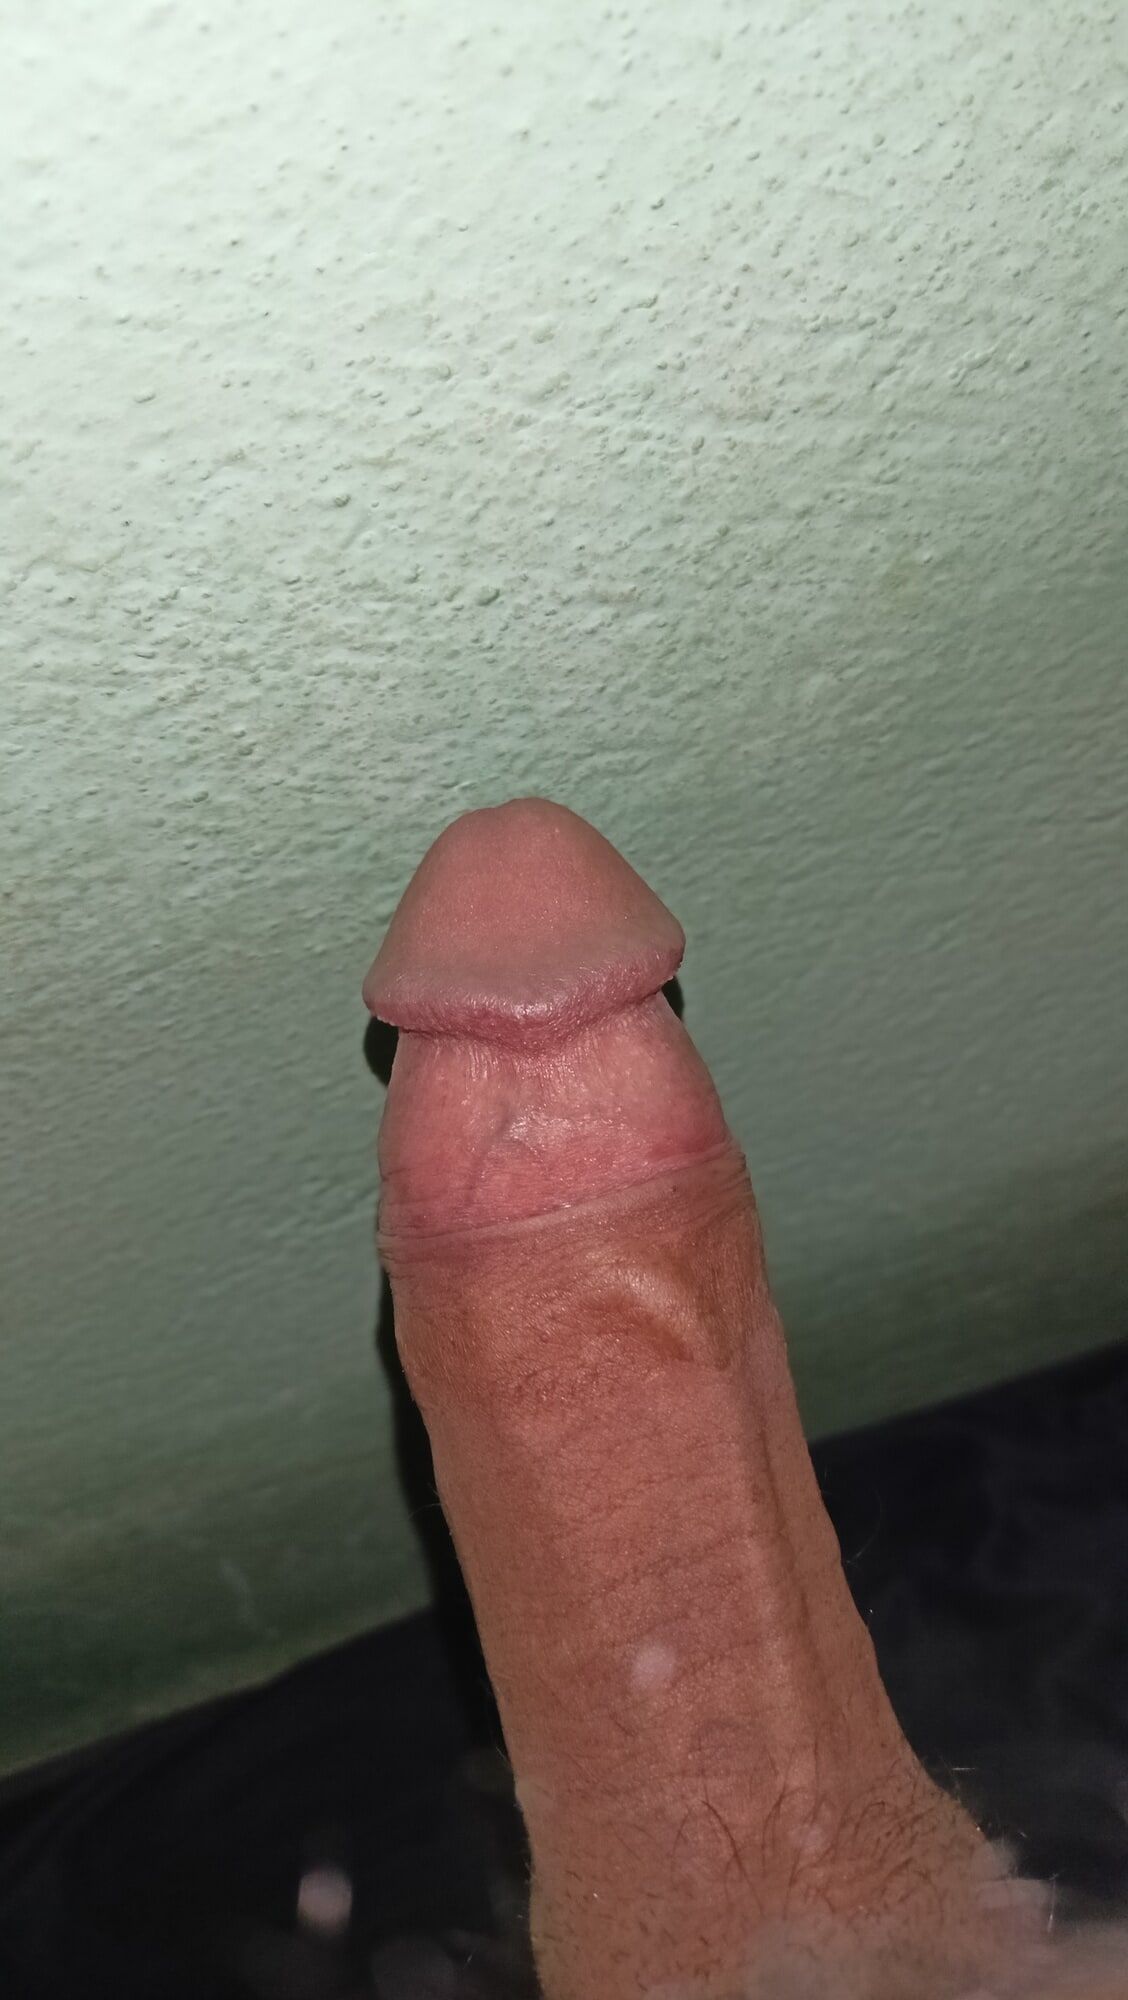 Opinions on my 5.7 inch cock!?